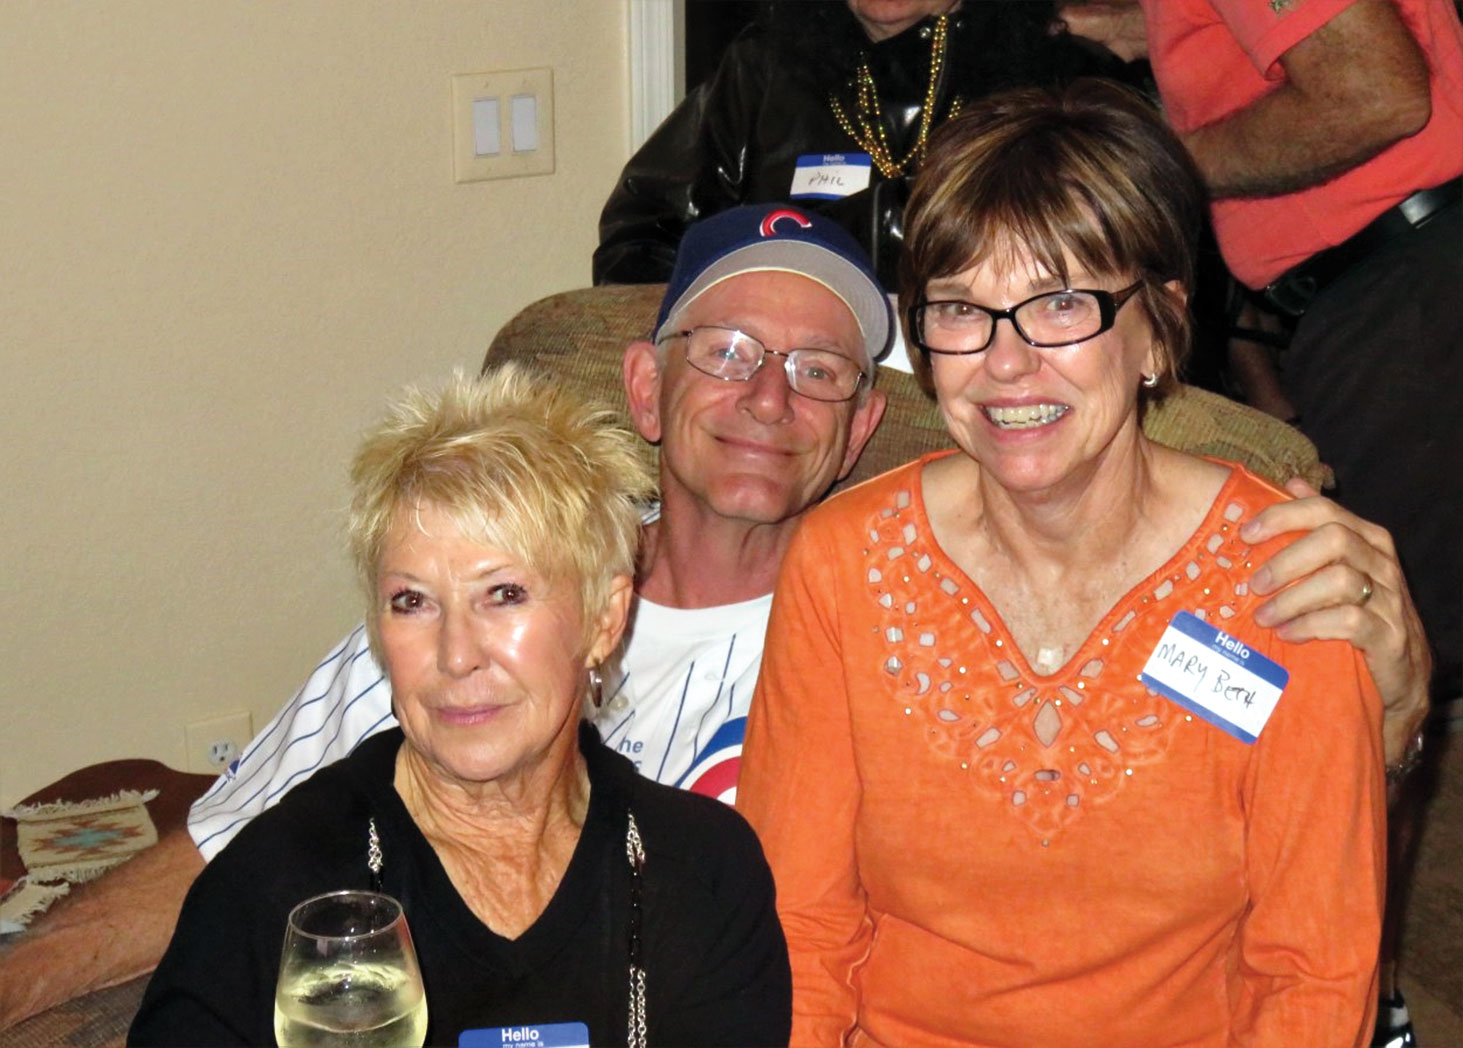 Chicago Cubs fan Bud Snyder with his fans, Mary Beth and Phyllis; photographer, Ron Talbot